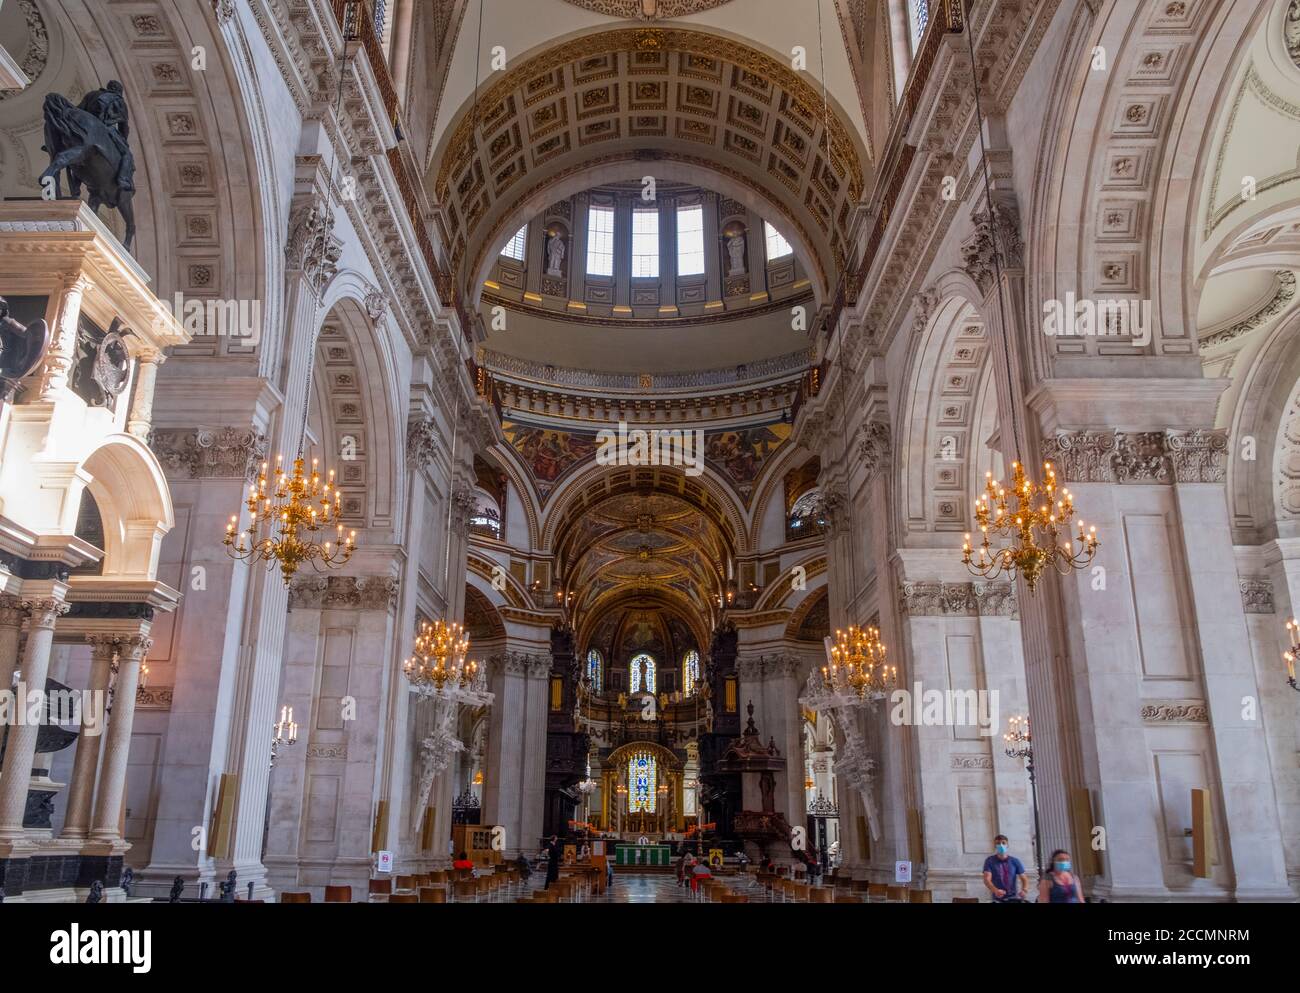 Looking up into the Dome and painted ceilings of St Pauls Cathedral in central London Stock Photo